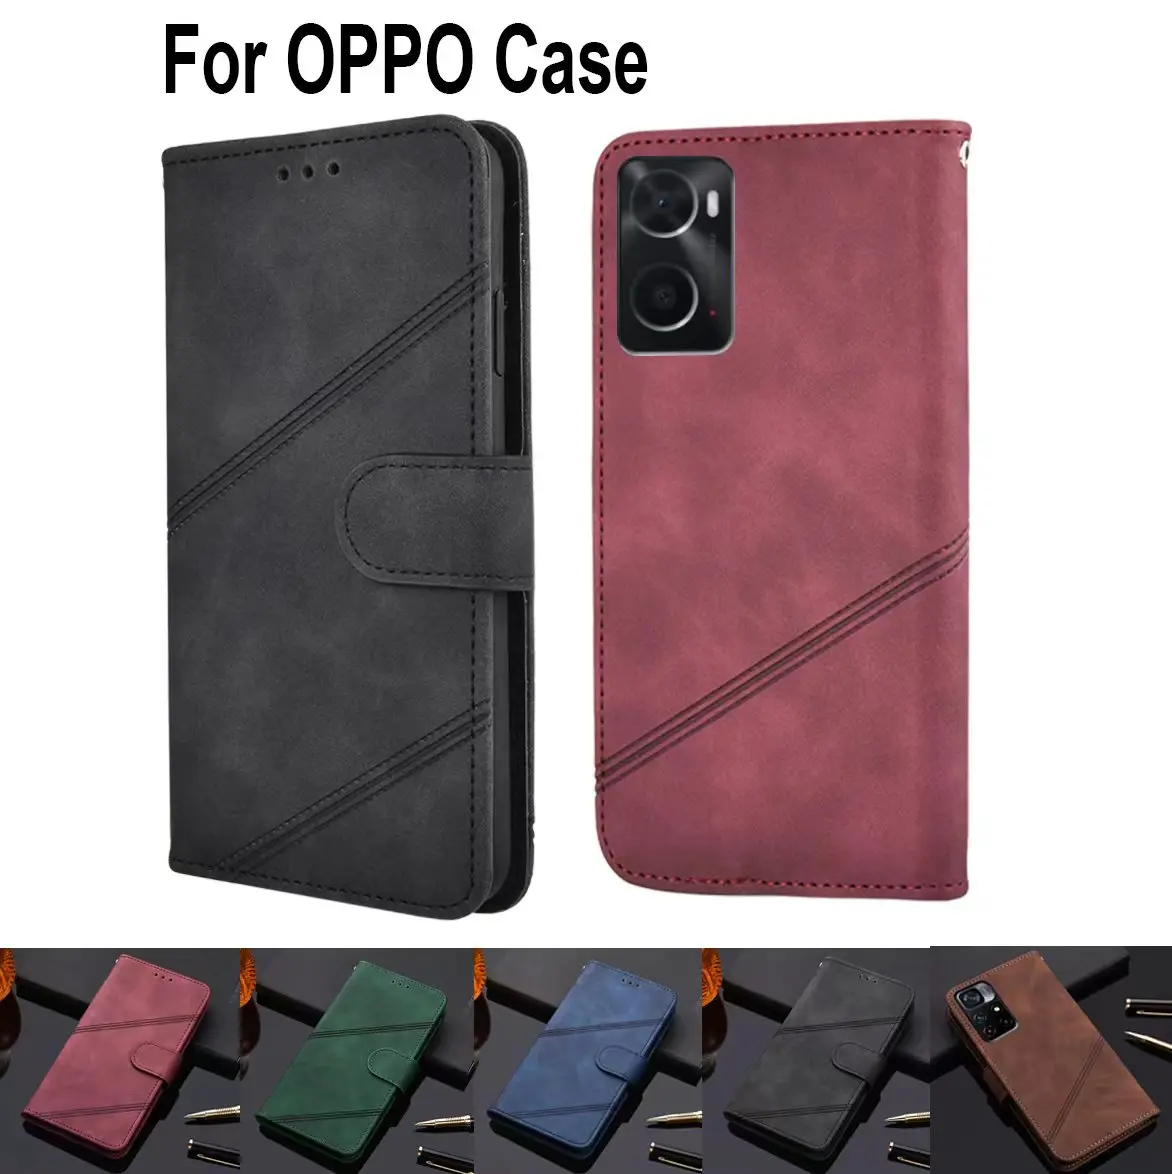 

Flip Leather Wallet Case For OPPO Reno 3A z 2 2Z Ace 3 4 Pro 4G 5G REMO 2F 4SE 4 Lite 4Z 5G 4F Vintage Phone Shell Cover Fundas